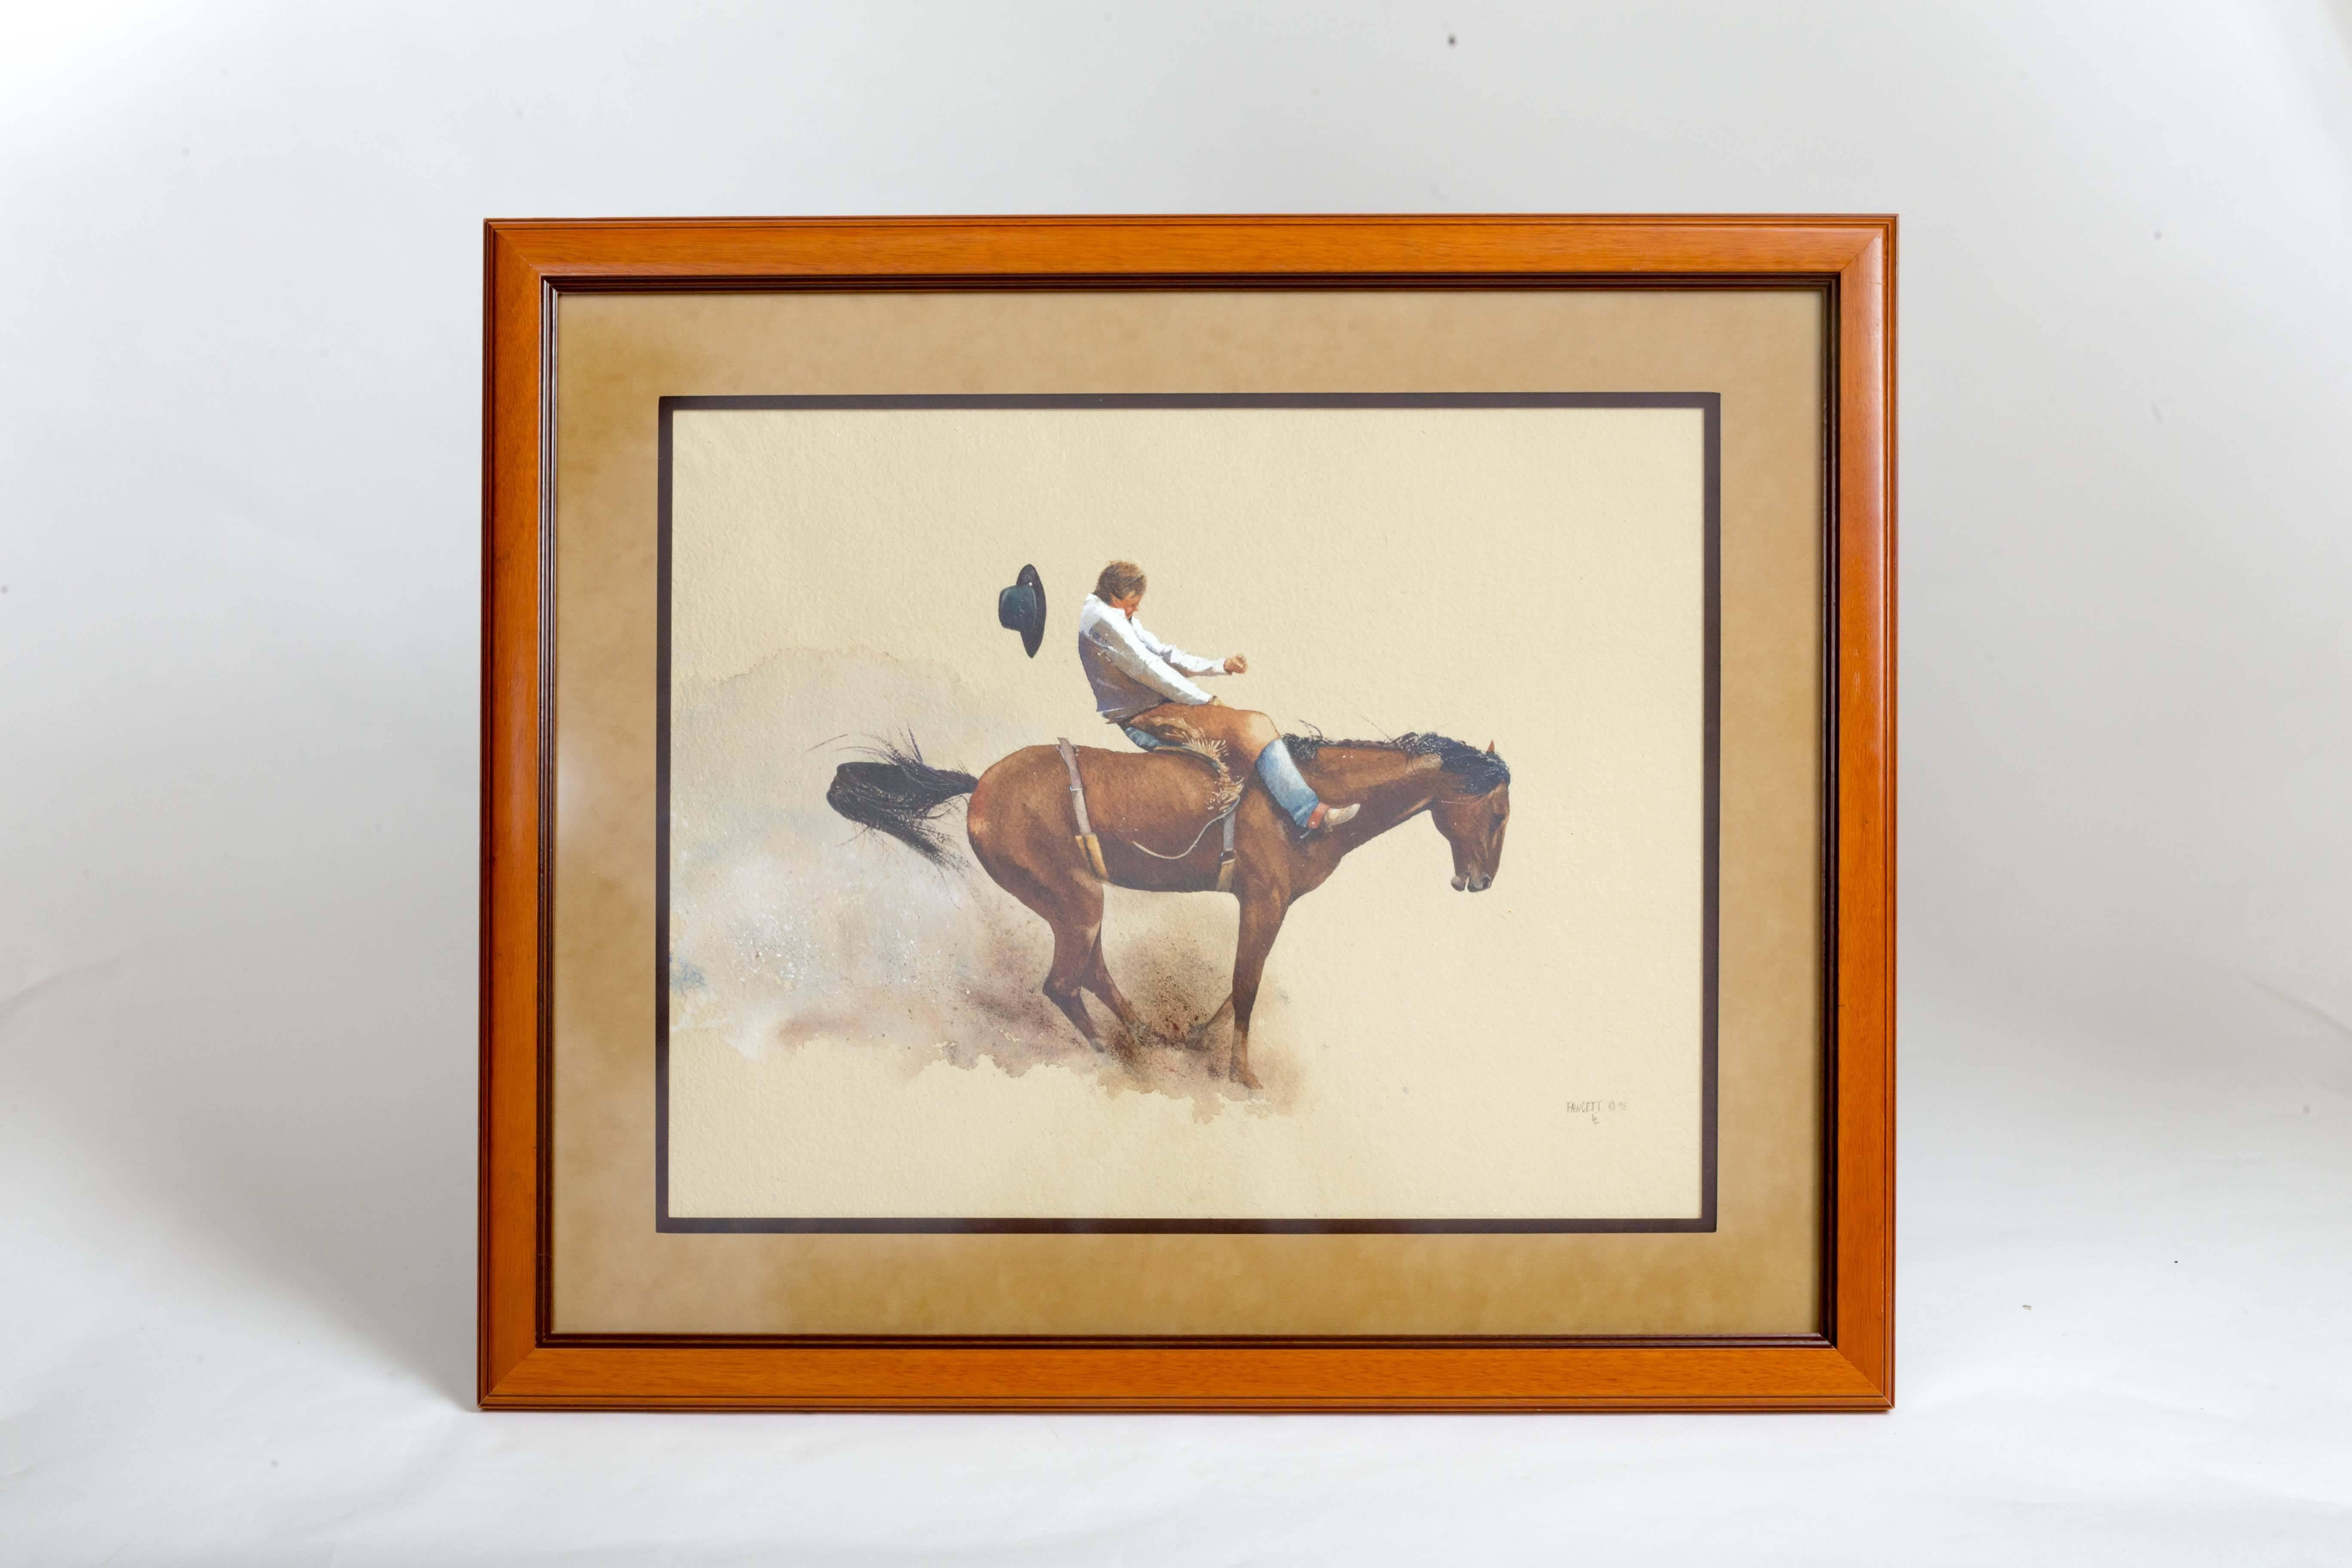 John Fawcett 'Pile Driver' watercolor.
(American, b. 1952)
Pile Driver, 1995.
Watercolor on paper.
Signed Fawcett and dated (lower right).
Measures: 24 x 19 inches.

Western Cowboy & Bucking Bronco illustration.